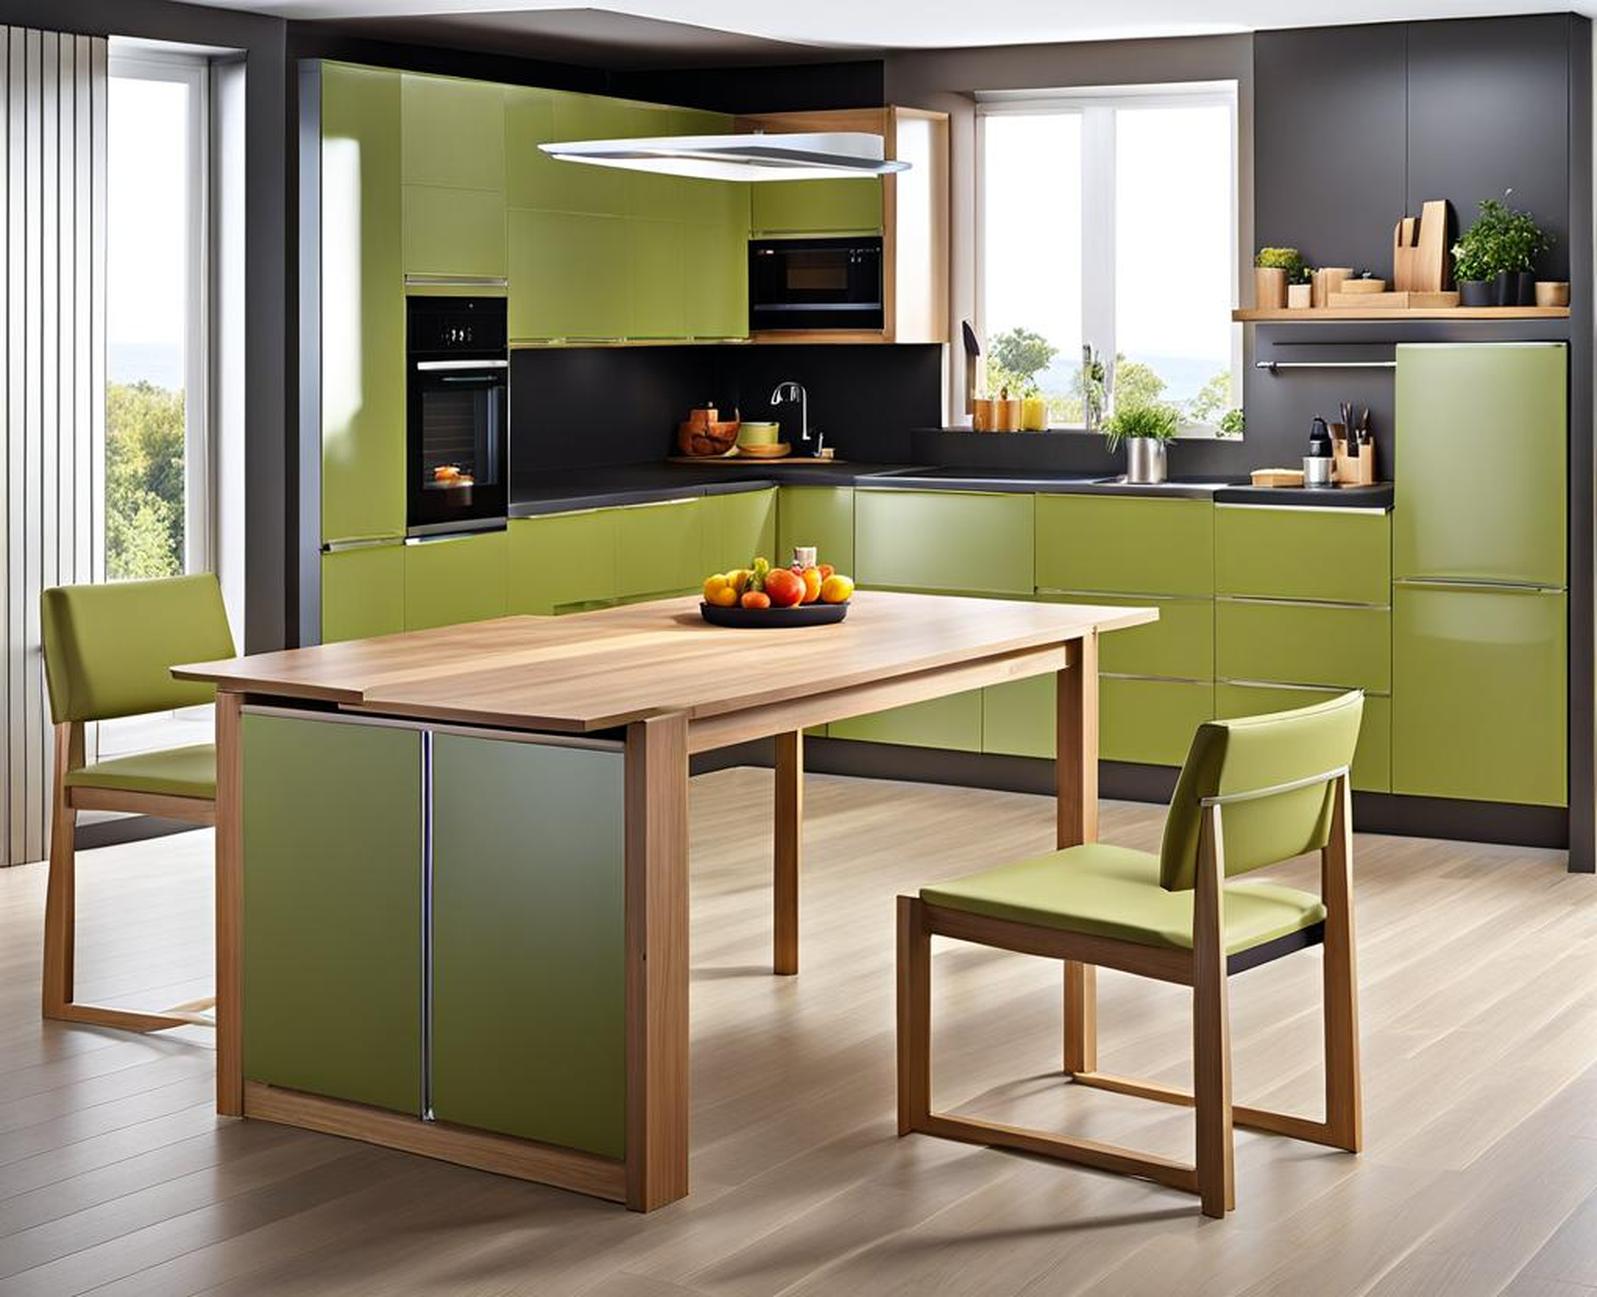 transformable furniture kitchen table